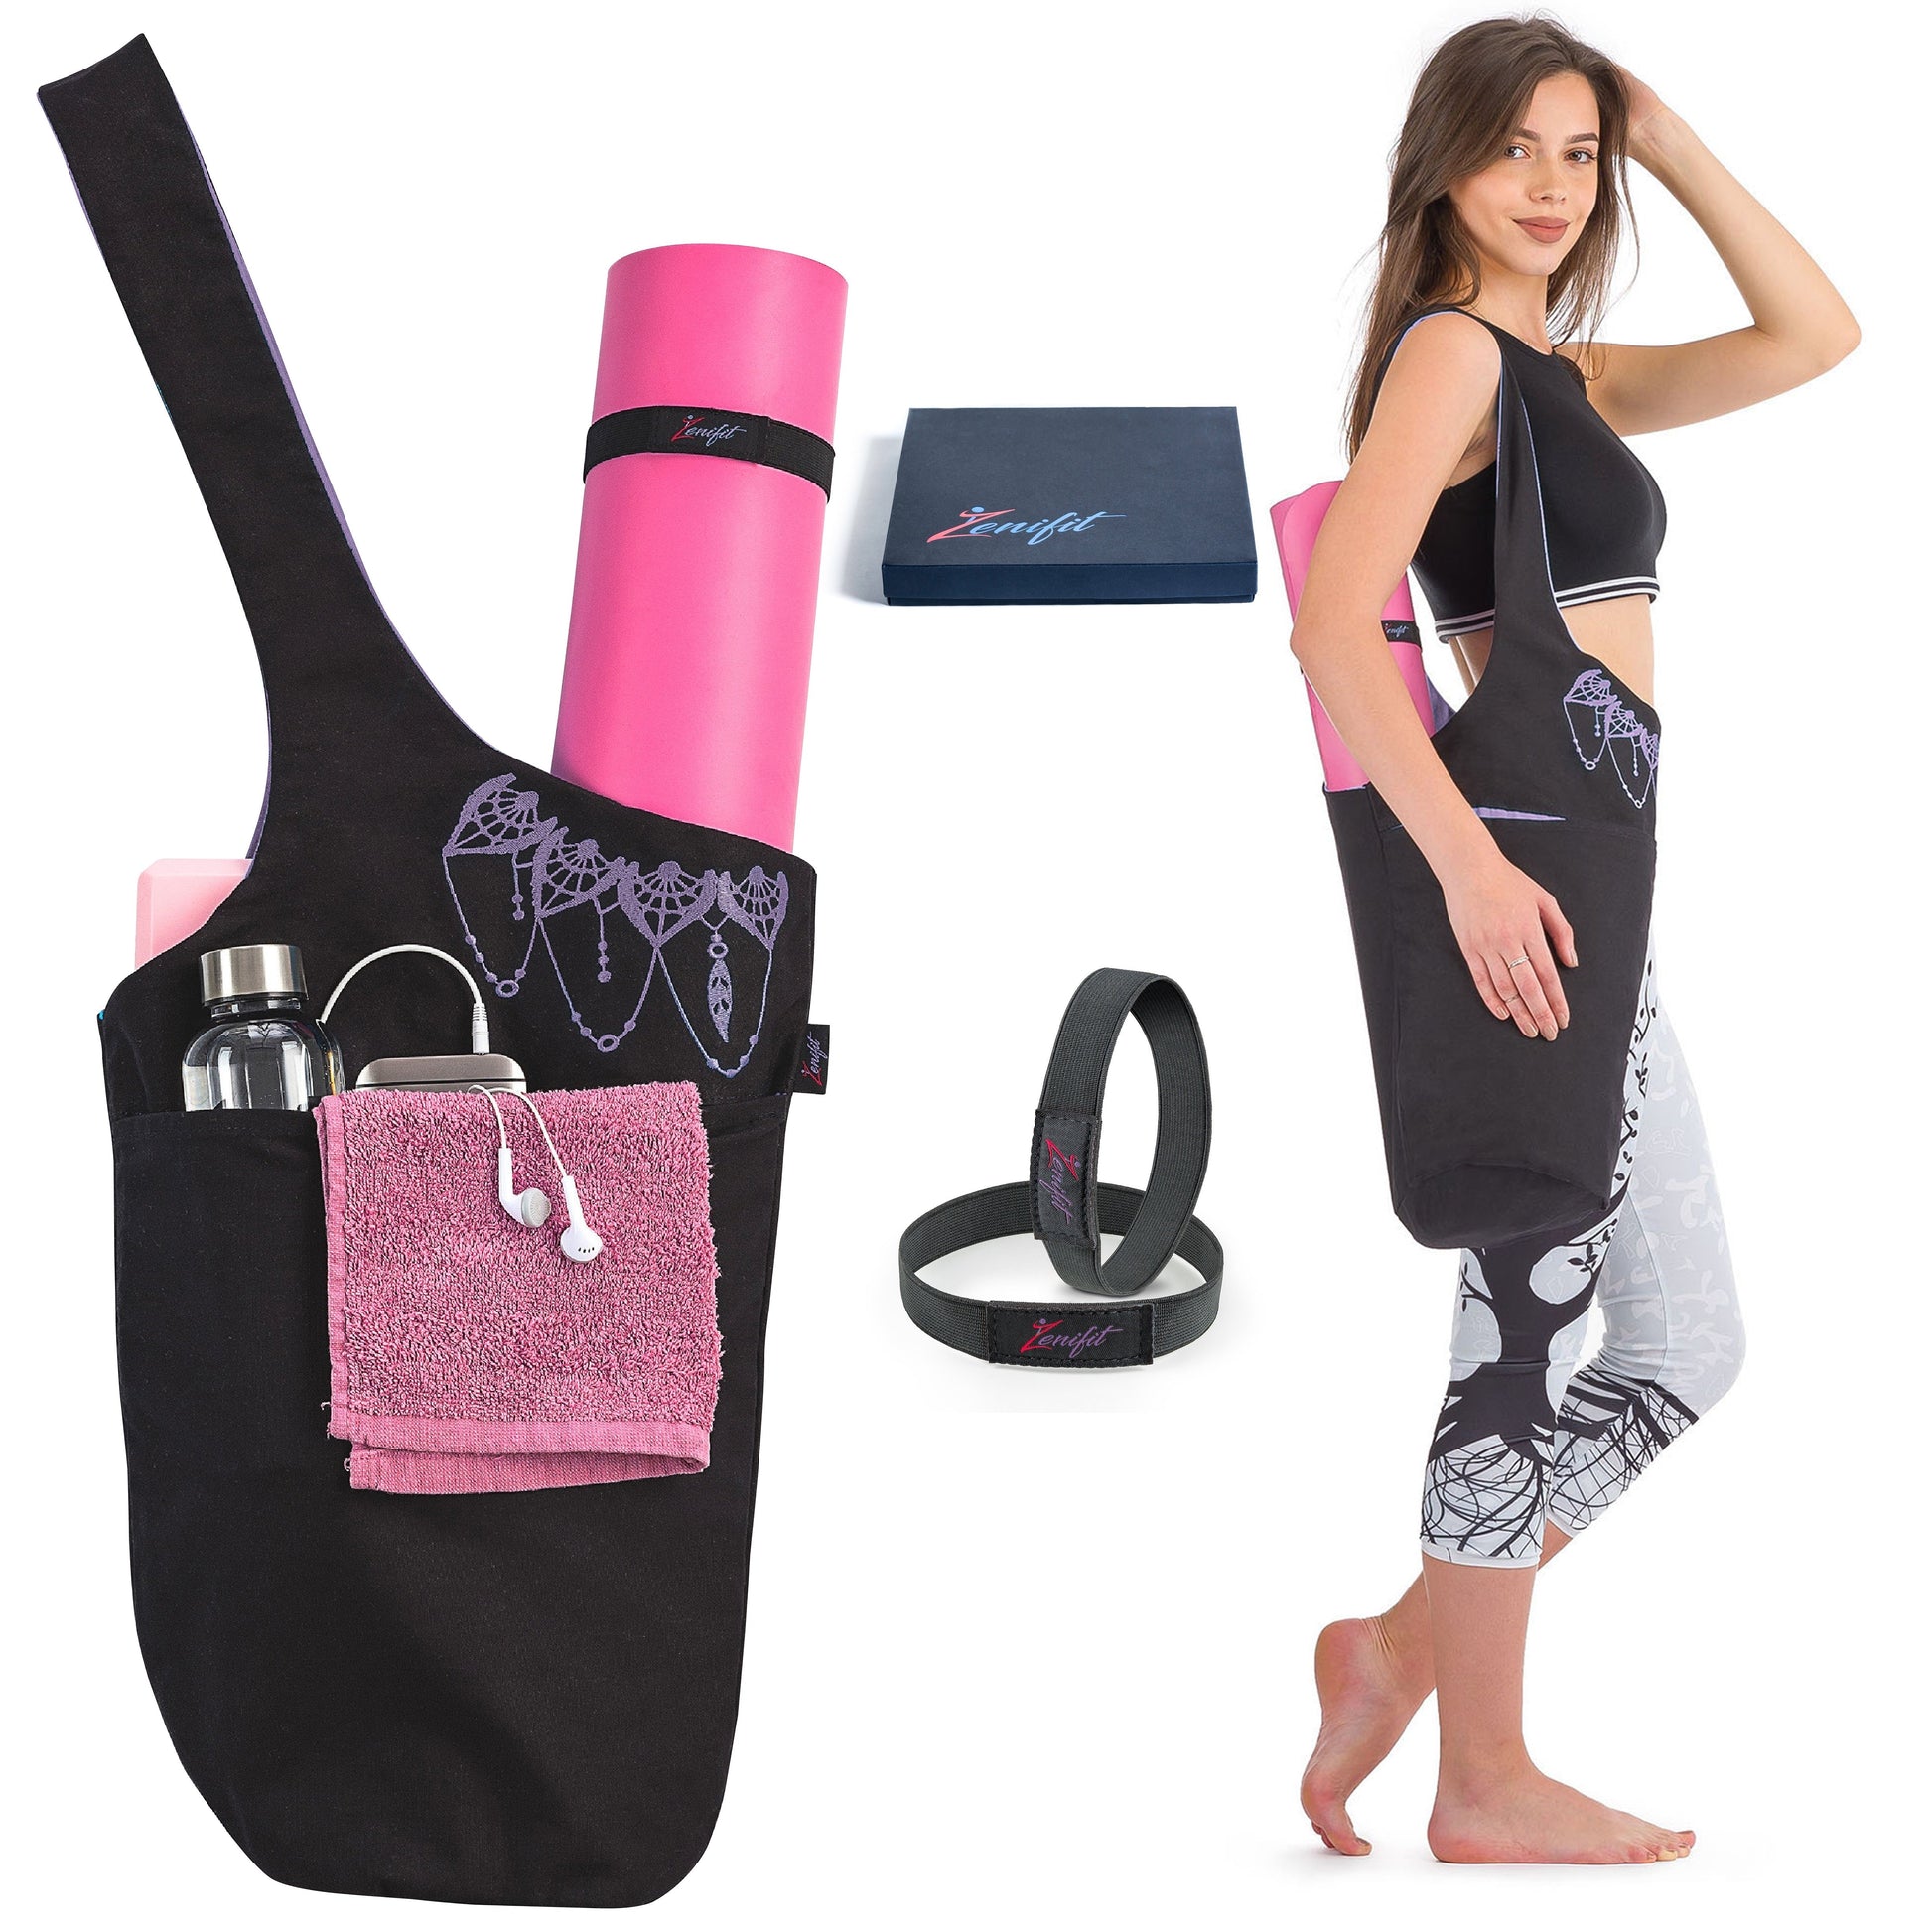 Yoga mat bag black and lavender purple with accessories, gift box and elastics, women wearing yoga bag on shoulder